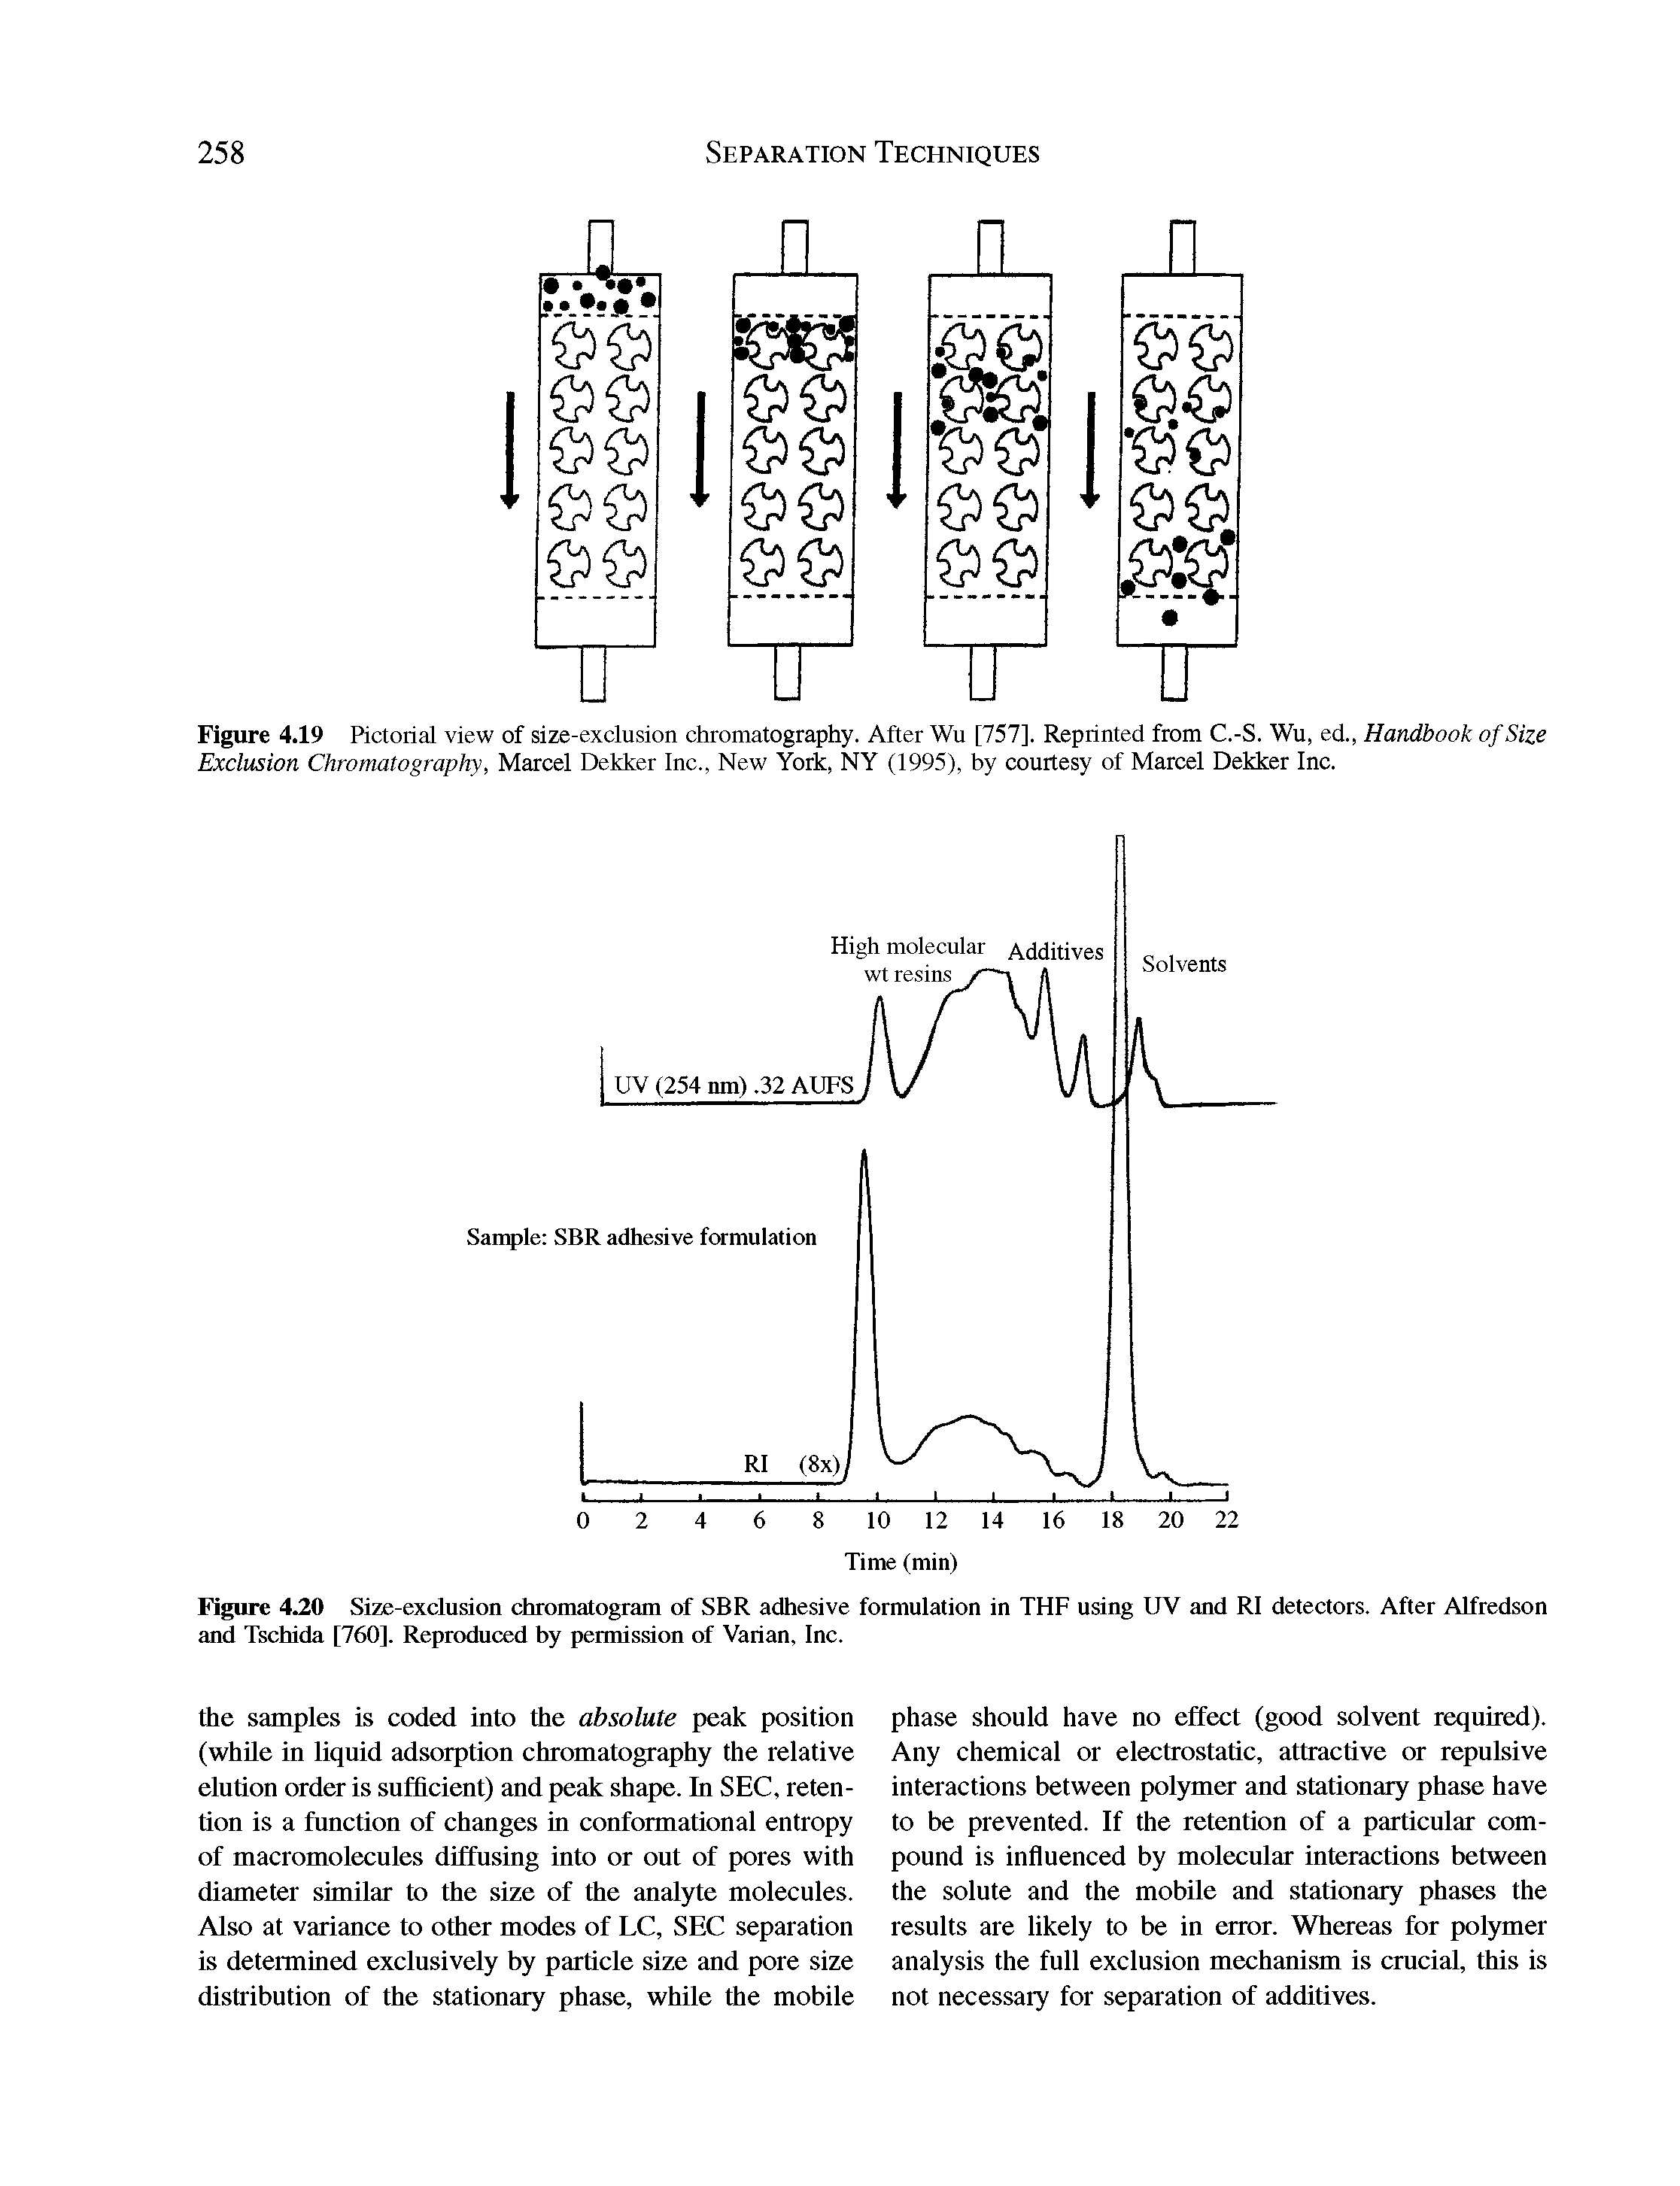 Figure 4.20 Size-exclusion chromatogram of SBR adhesive formulation in THF using UV and RI detectors. After Alfredson and Tschida [760]. Reproduced by permission of Varian, Inc.